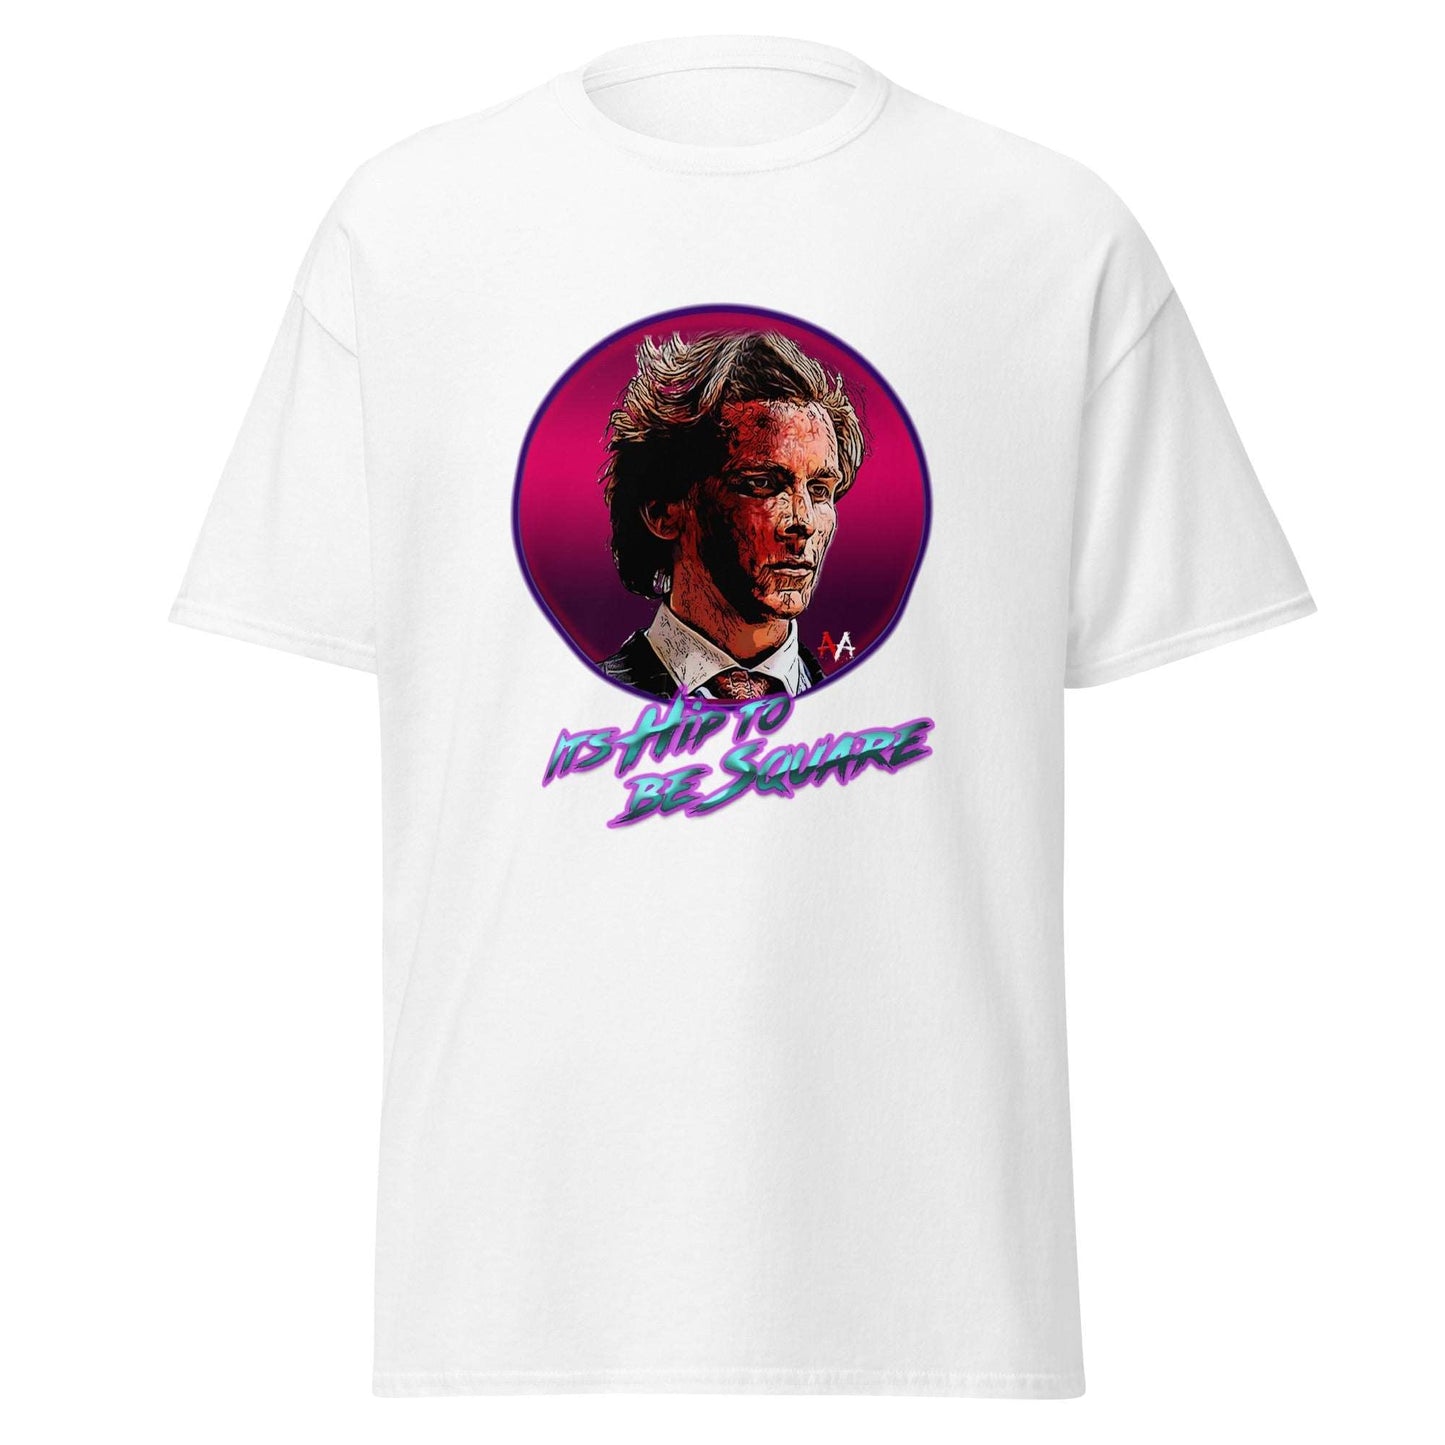 American Psycho Horror Movie T-Shirt - Hip To Be Square Design - thenightmareinc